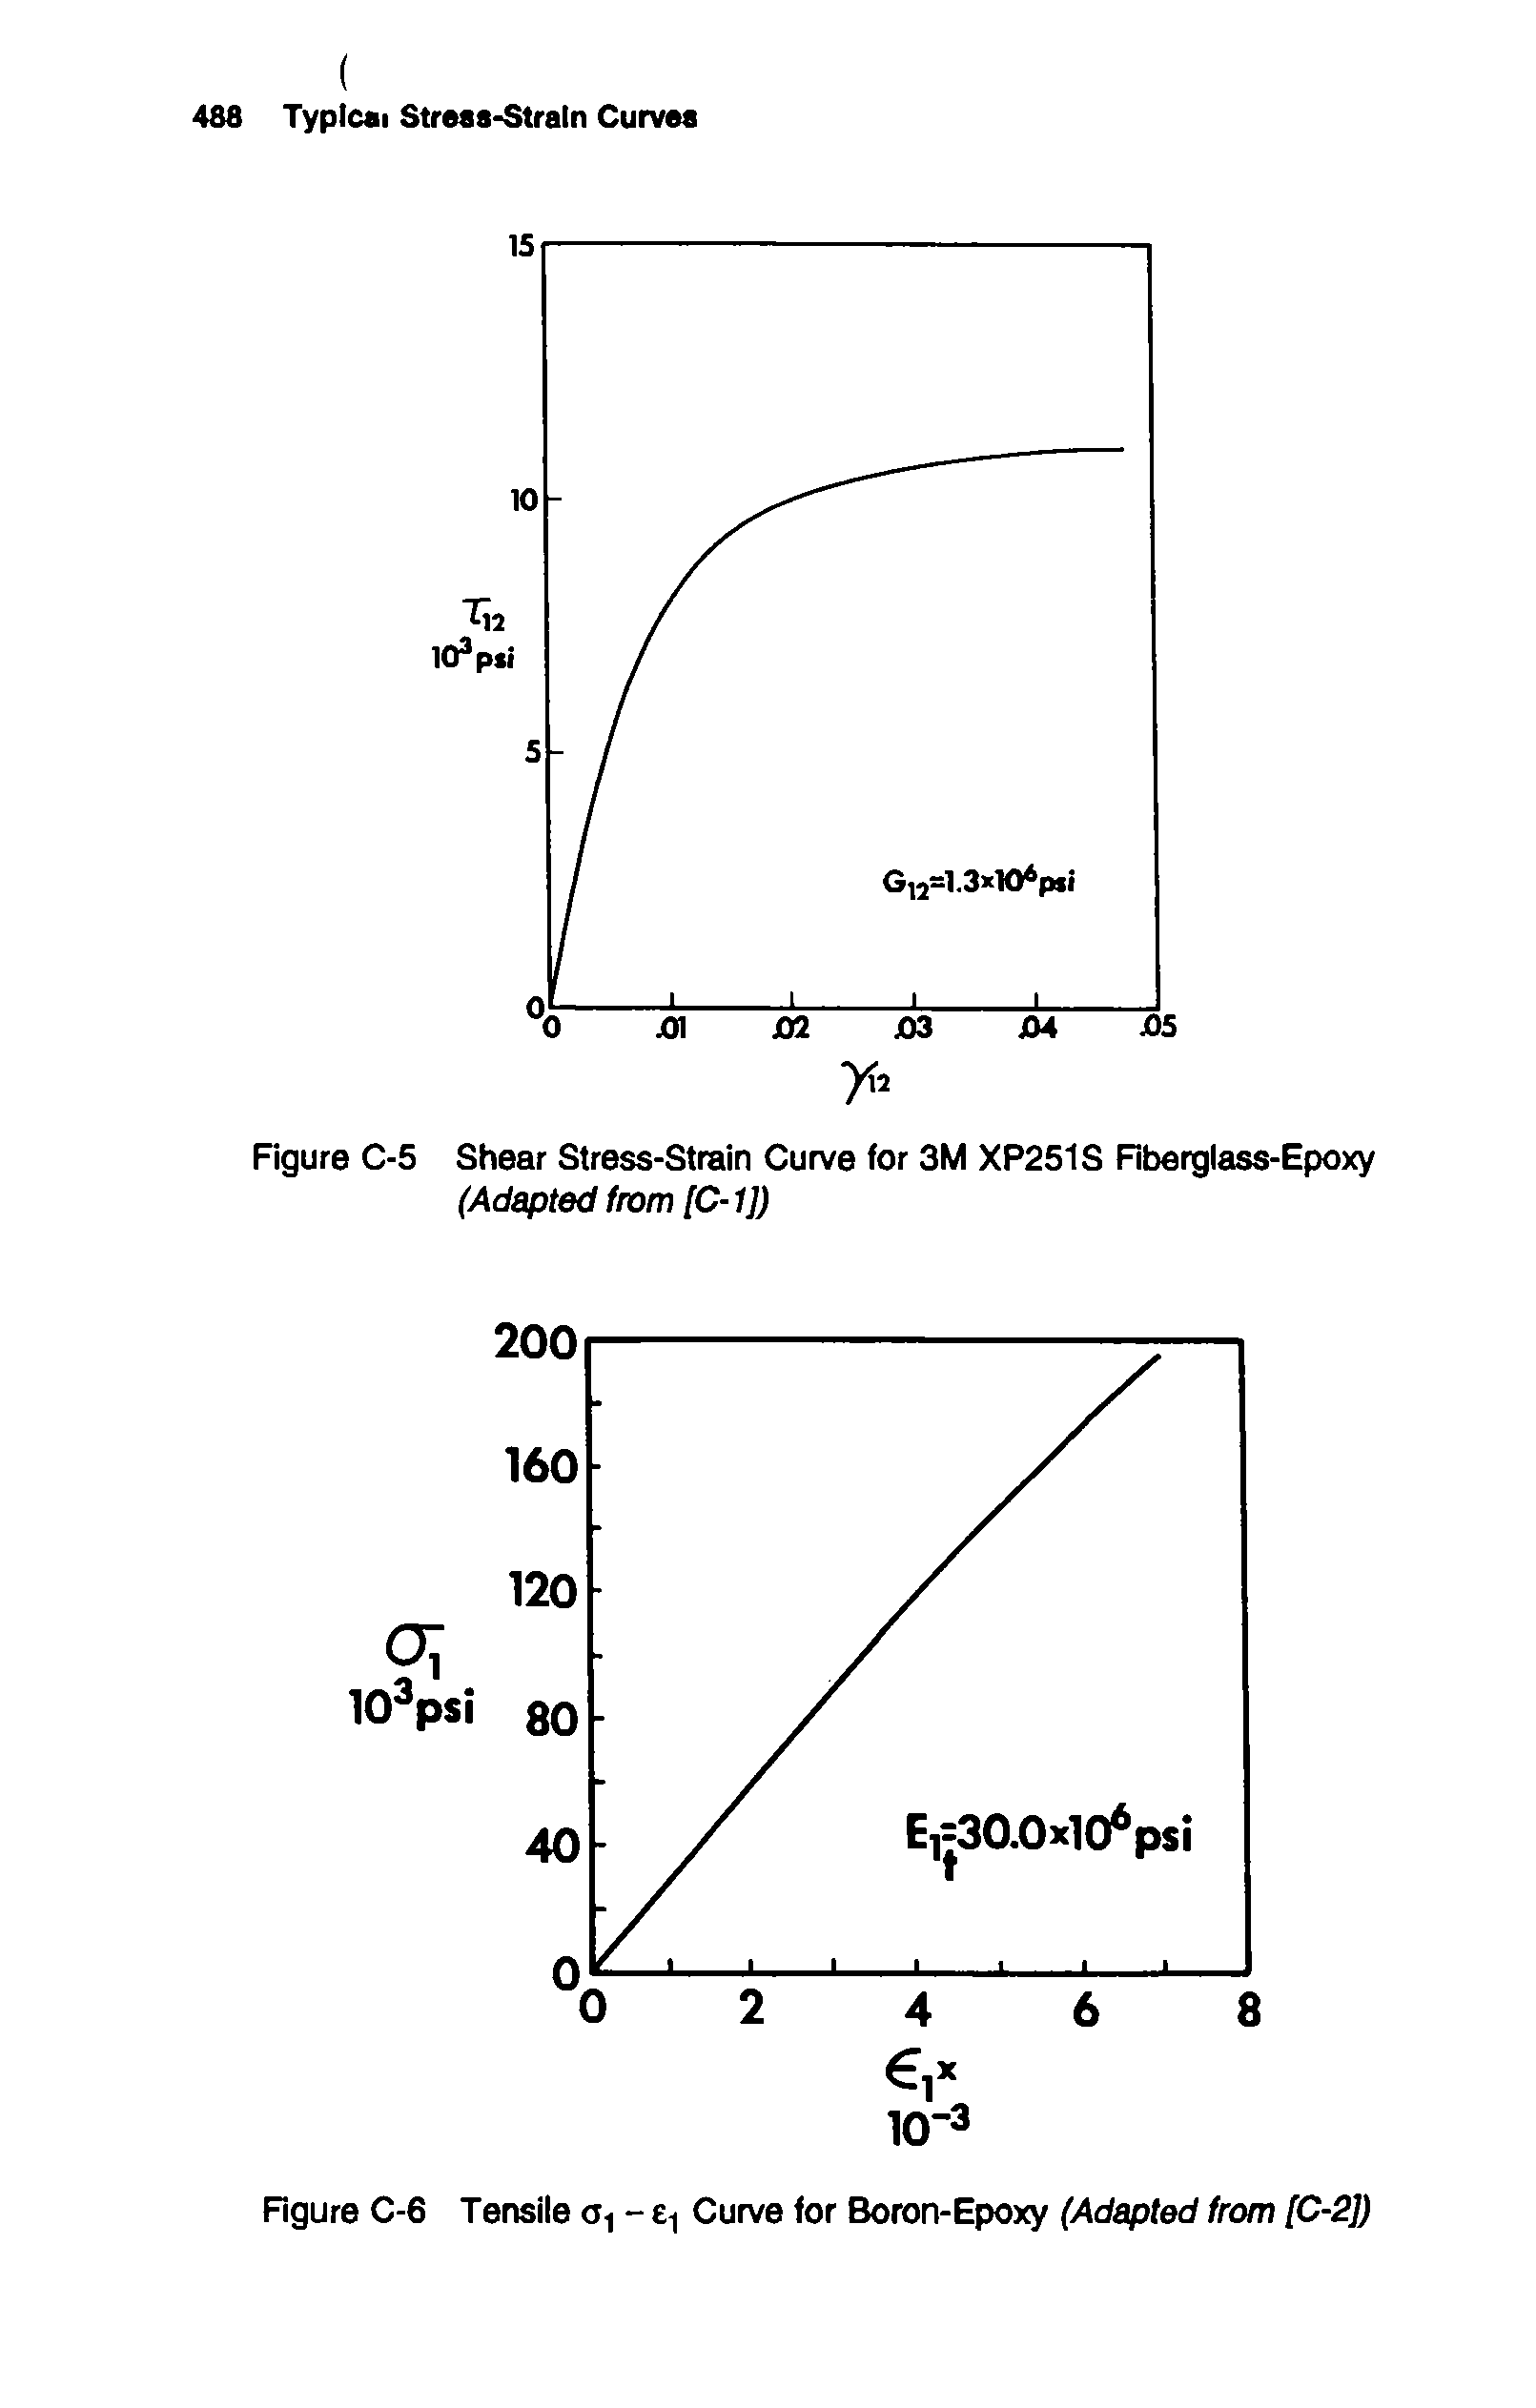 Figure C-6 Tensile Curve for Boron-Epoxy (Adapted from [C-2])...